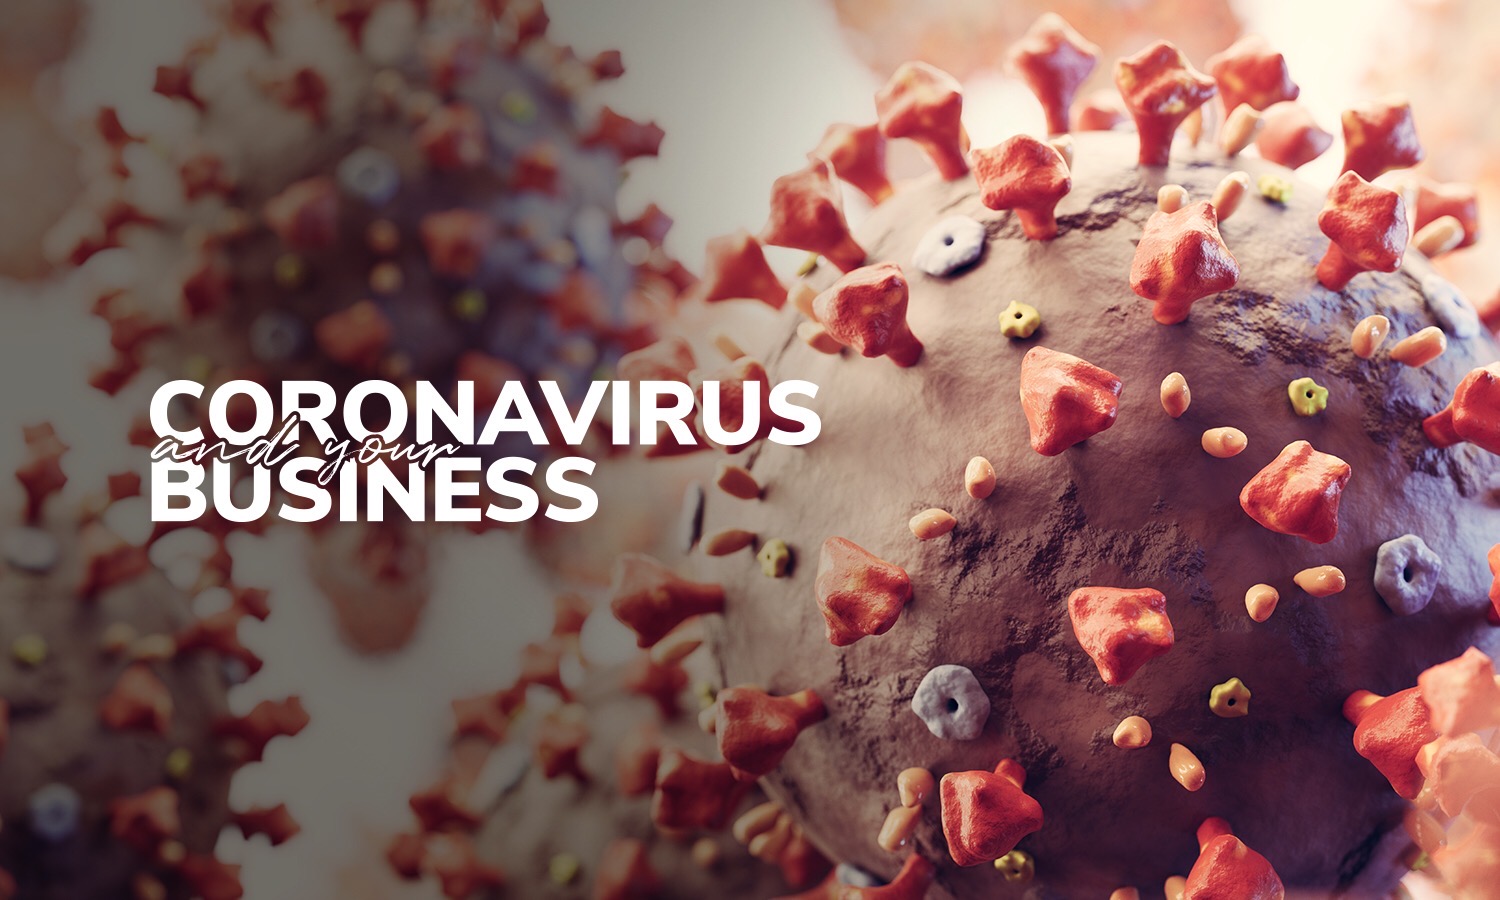 Photo of germs representing coronavirus and small businesses